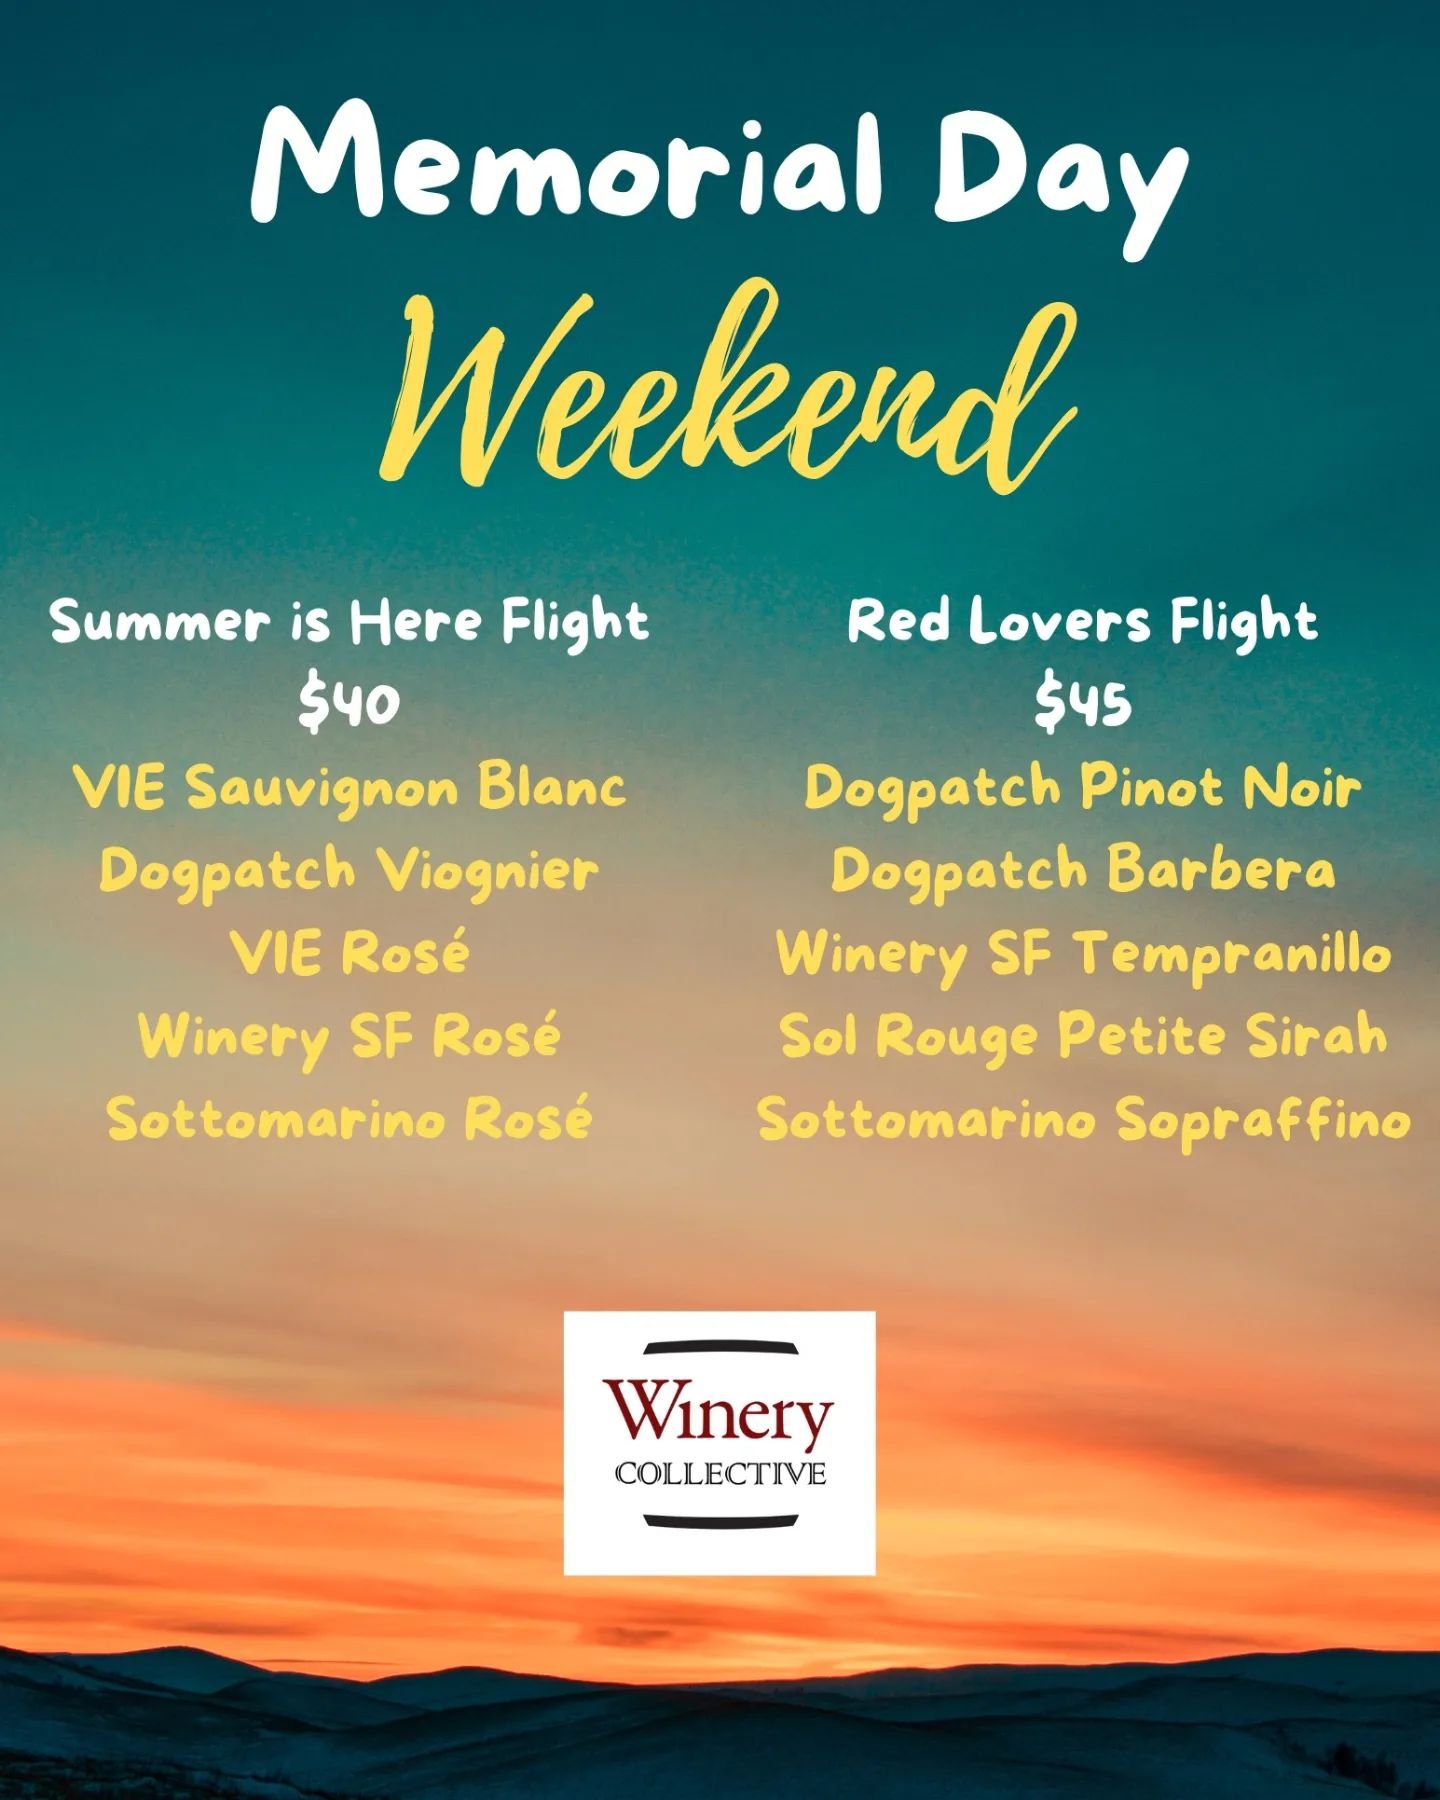 💥Join us on Memorial Weekend for 2 special flights of limited CA wine, in our tasting room at Fisherman's Wharf and celebrate the start of the summer 🍷🌞

#winerycollectivesf
#winetime #winerycollective #fishermanswharf #sanfrancisco #sanfranciscow